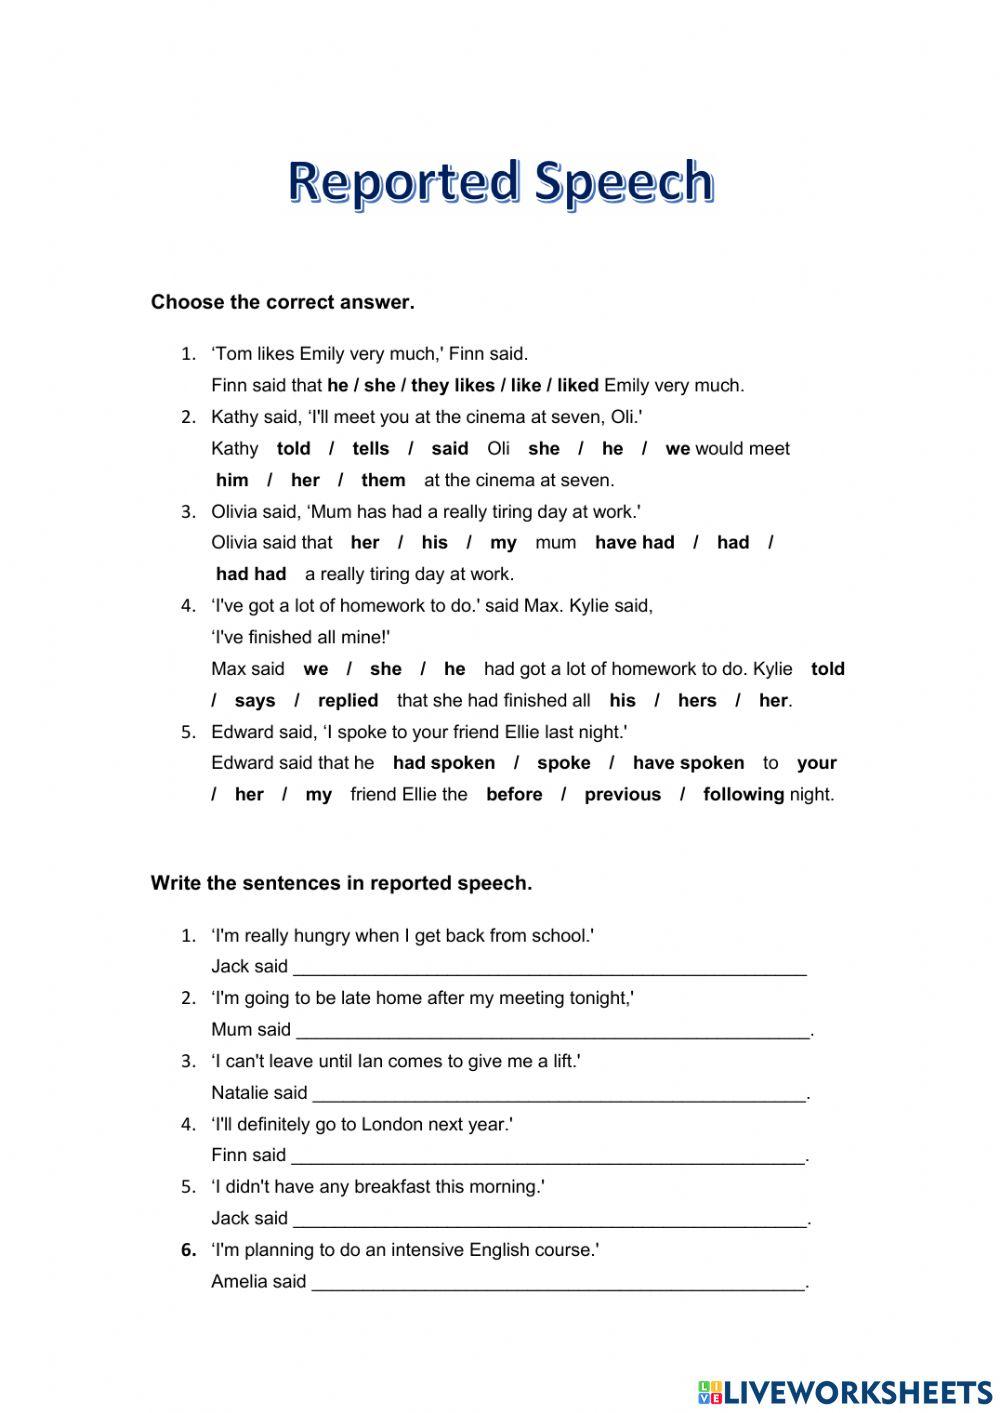 reported speech exercises for class 7 online